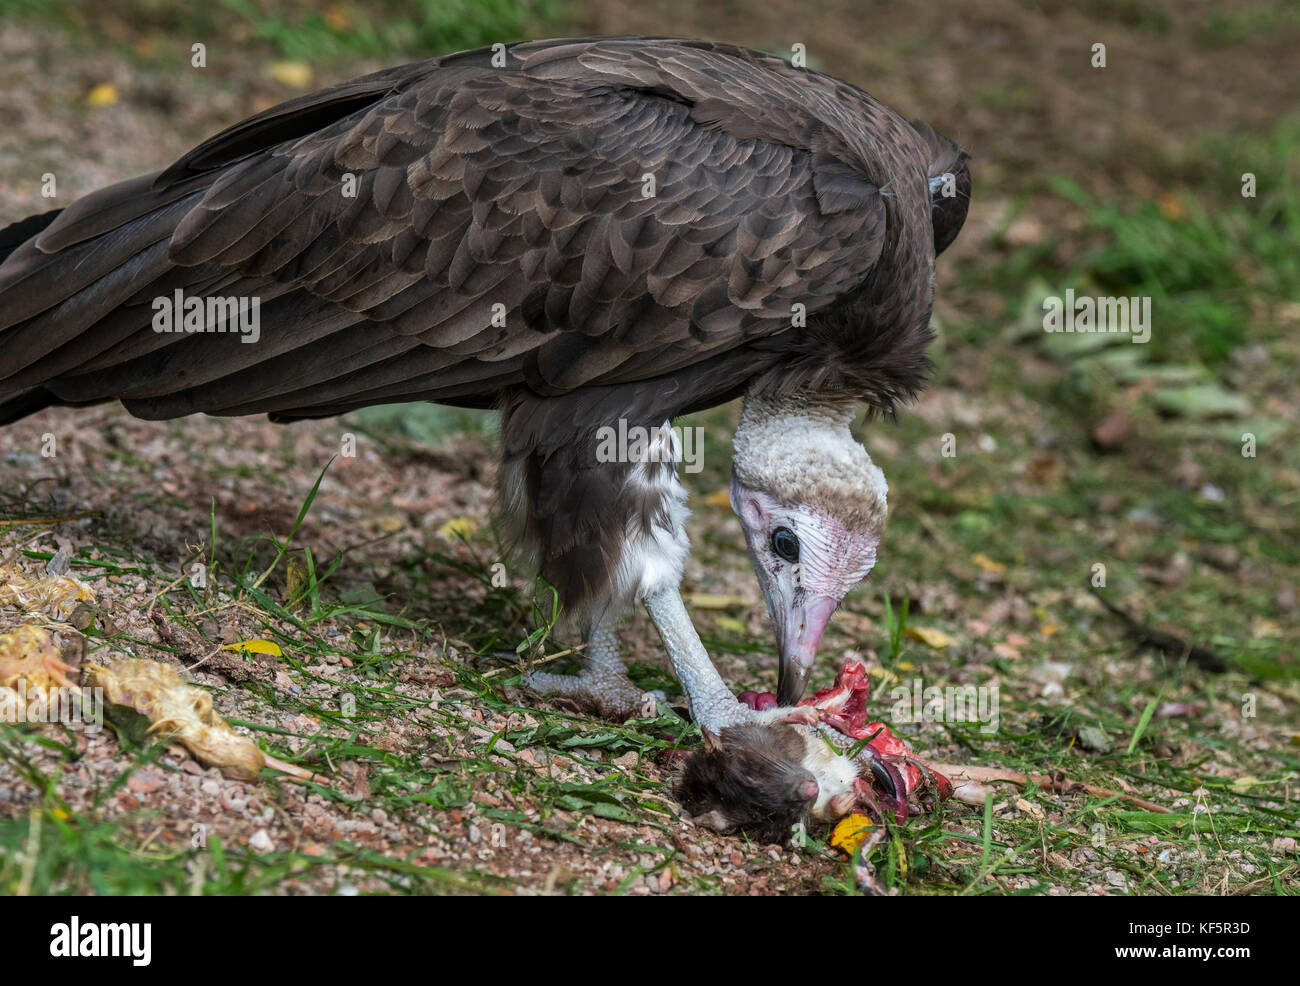 Hooded vulture (Necrosyrtes monachus) native to Africa eating dead rodent Stock Photo